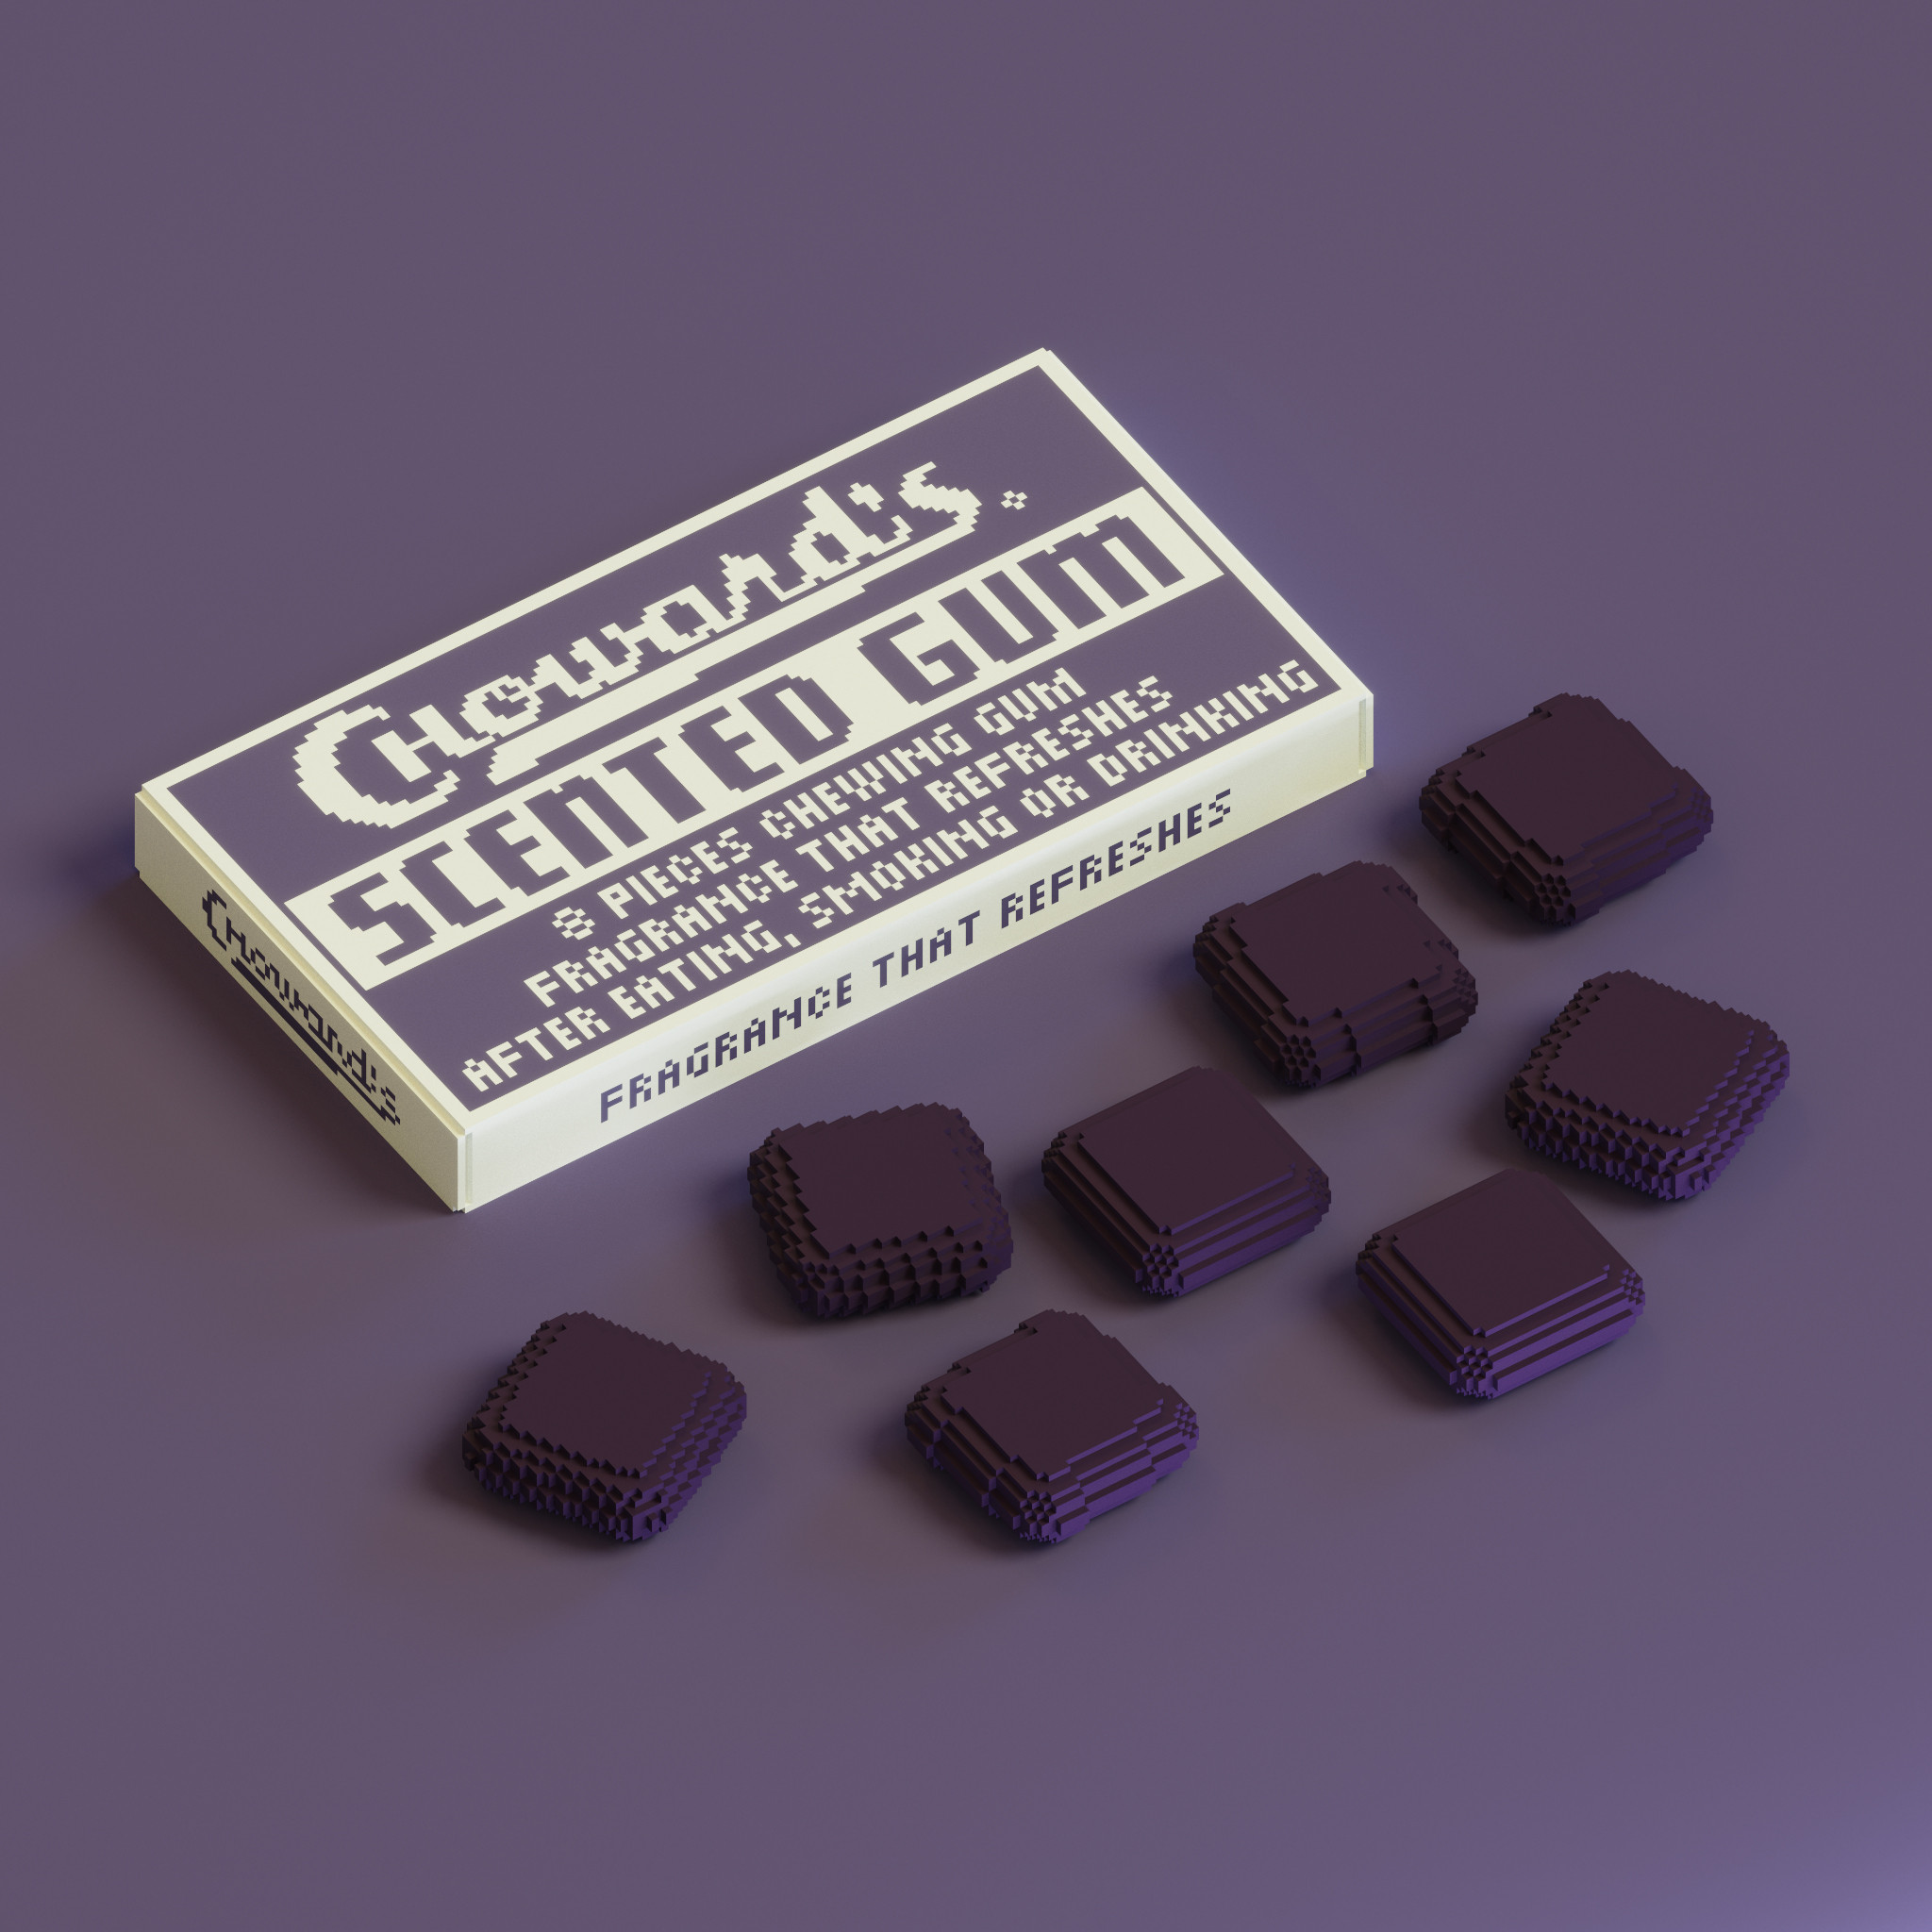 Voxel Choward's Scented Gum Package created and rendered using Magicavoxel software.